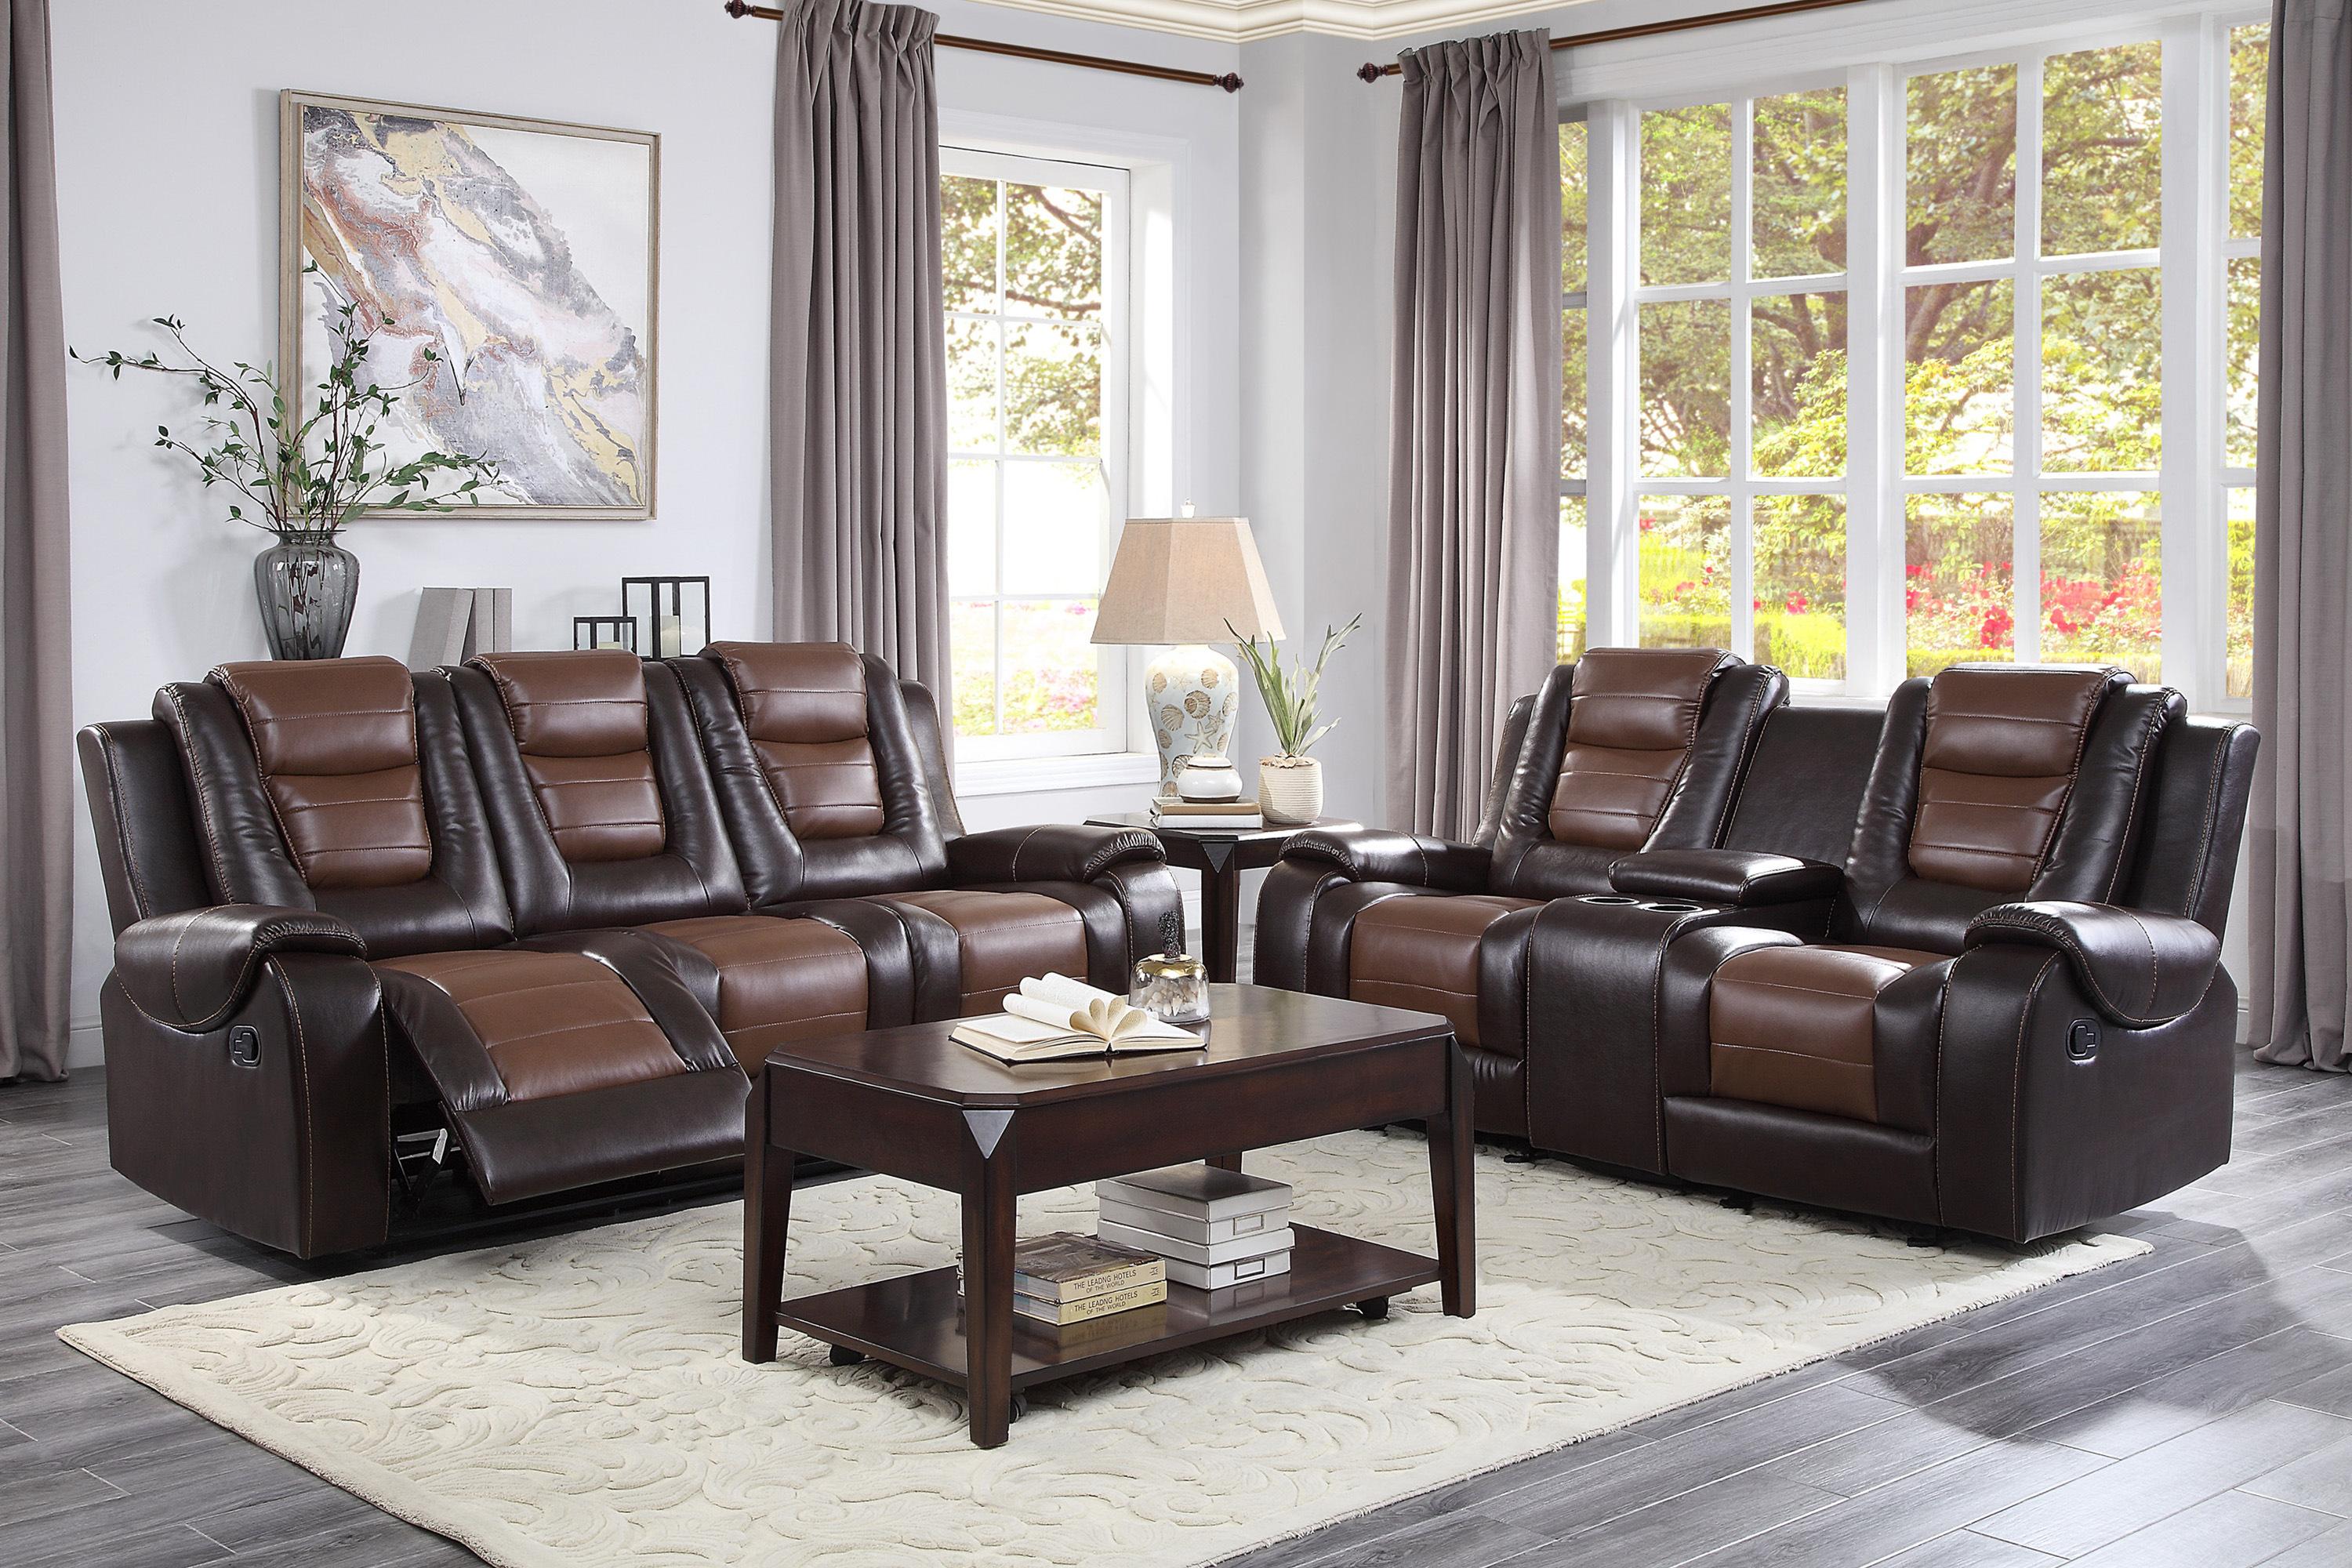 Transitional Reclining Set 9470BR-2PC Briscoe 9470BR-2PC in Light Brown, Dark Brown Faux Leather